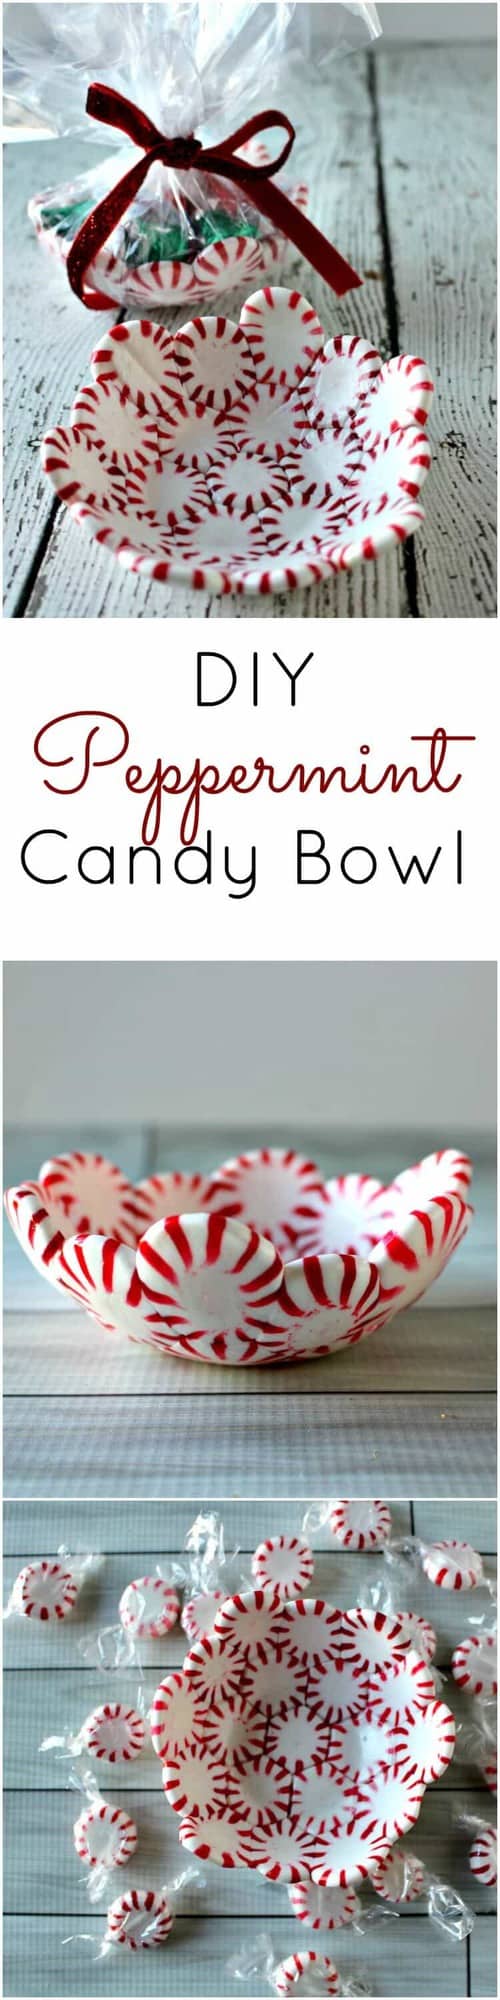 DIY Peppermint Candy Bowl by Princess Pinky Girl